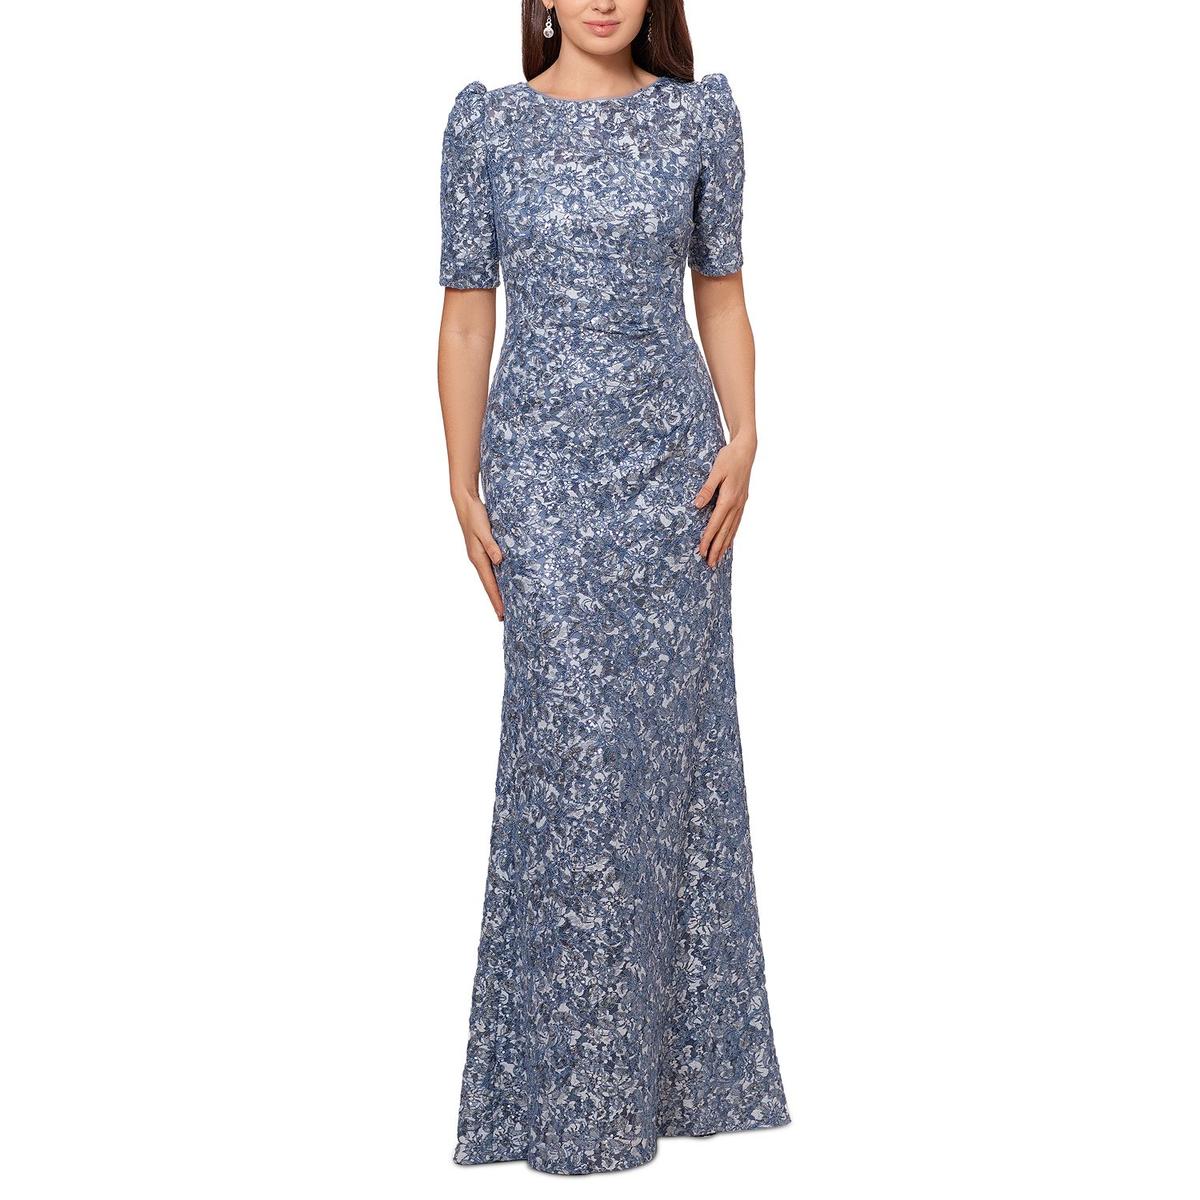 Pre-owned Xscape Womens Sequined Maxi Evening Dress Gown Petites Bhfo 0221 In Blue/silver